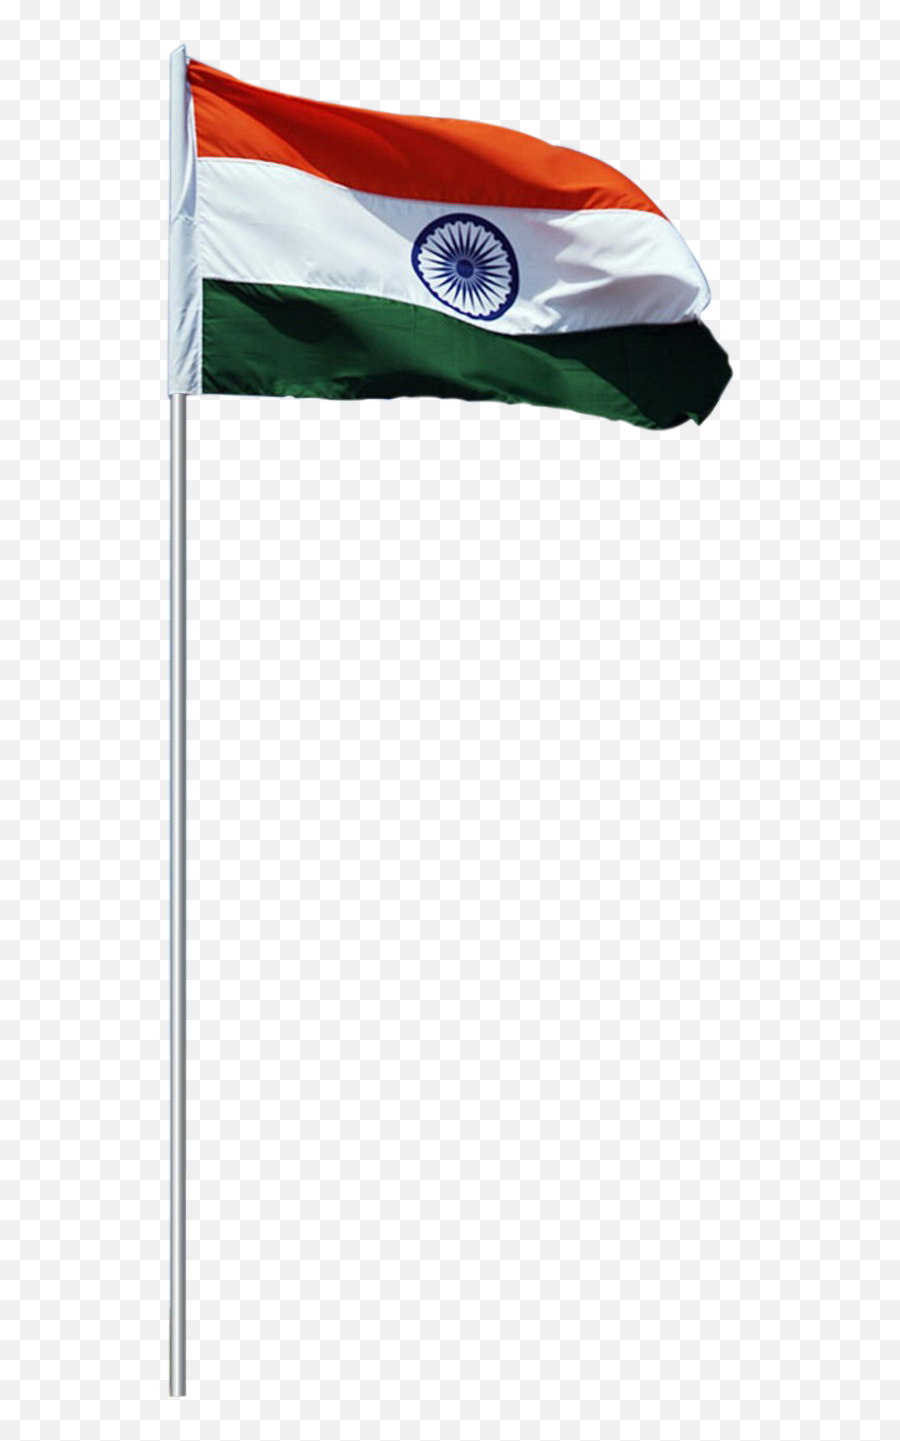 Indian Full Flag - 10 Free Hq Online Puzzle Games On Full Screen Indian Flag Emoji,India Flag Emoji